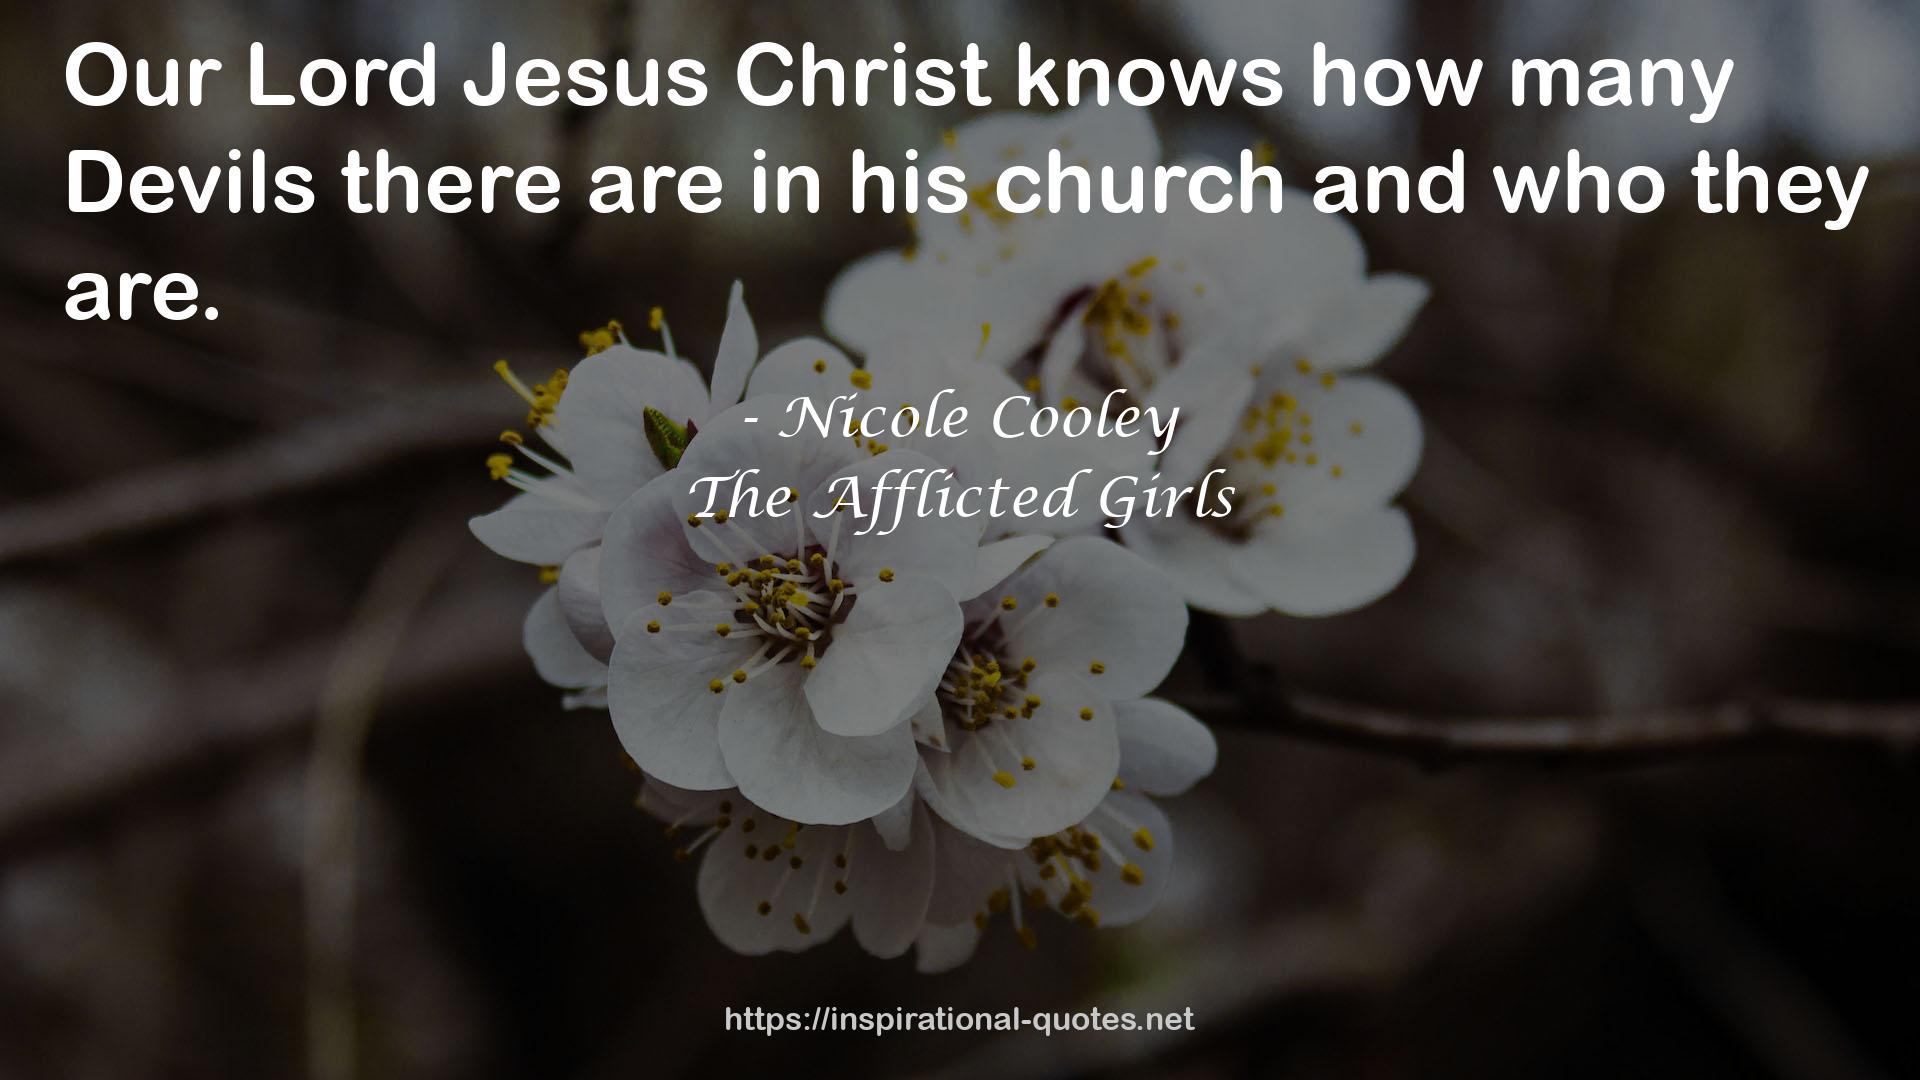 Nicole Cooley QUOTES